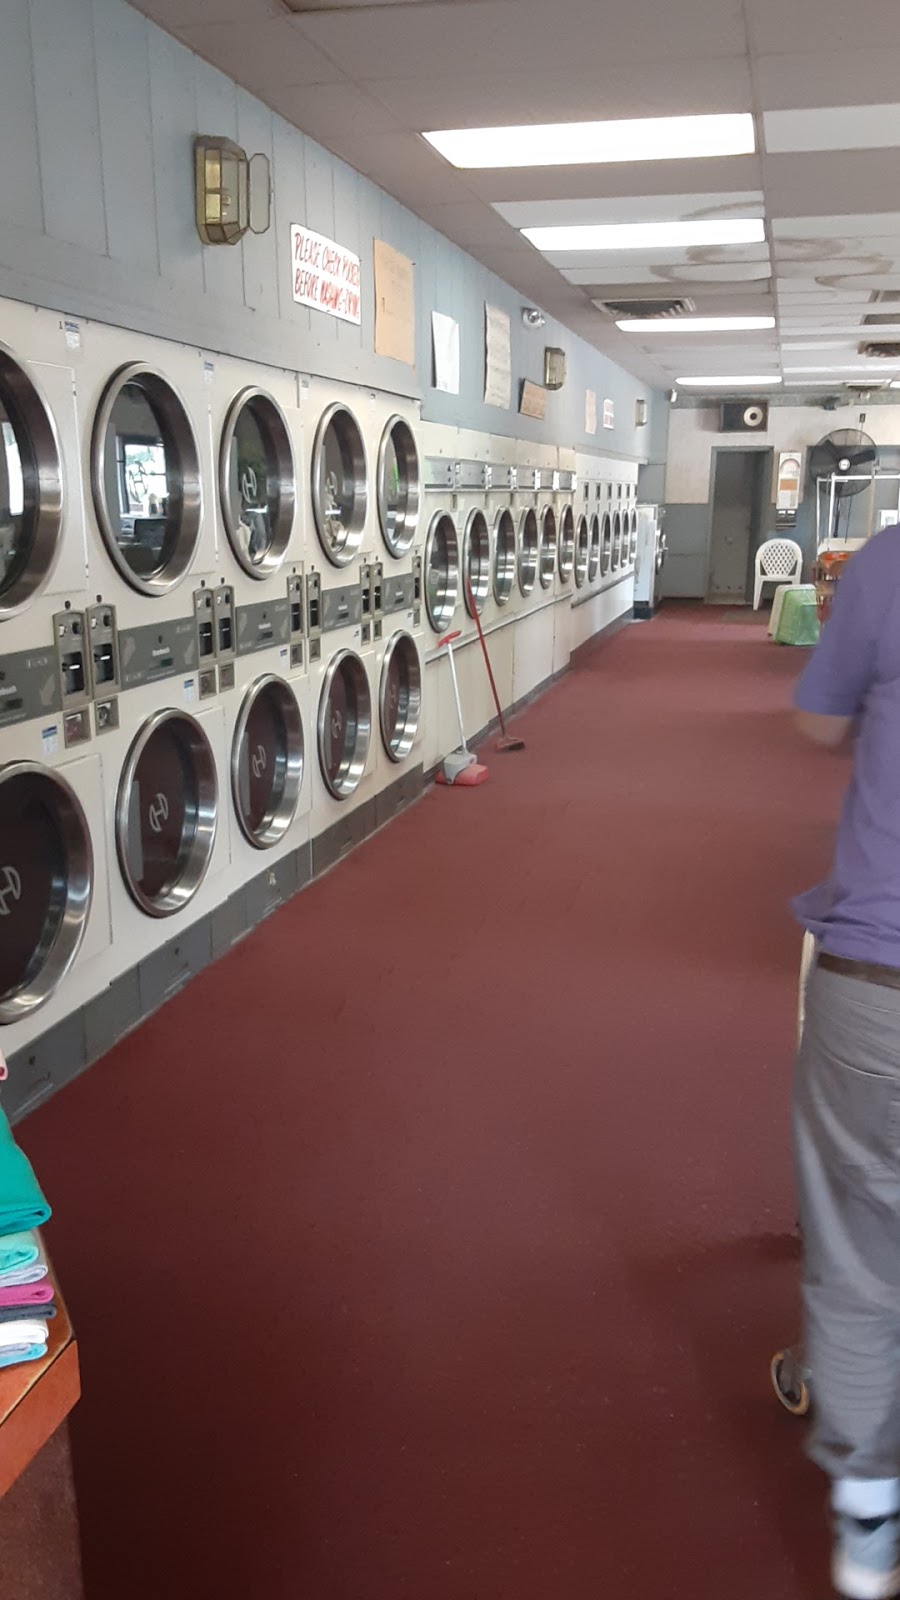 East Main Coin Laundry & Dry Cleaning | 936 E Main St, Ravenna, OH 44266 | Phone: (330) 297-6889